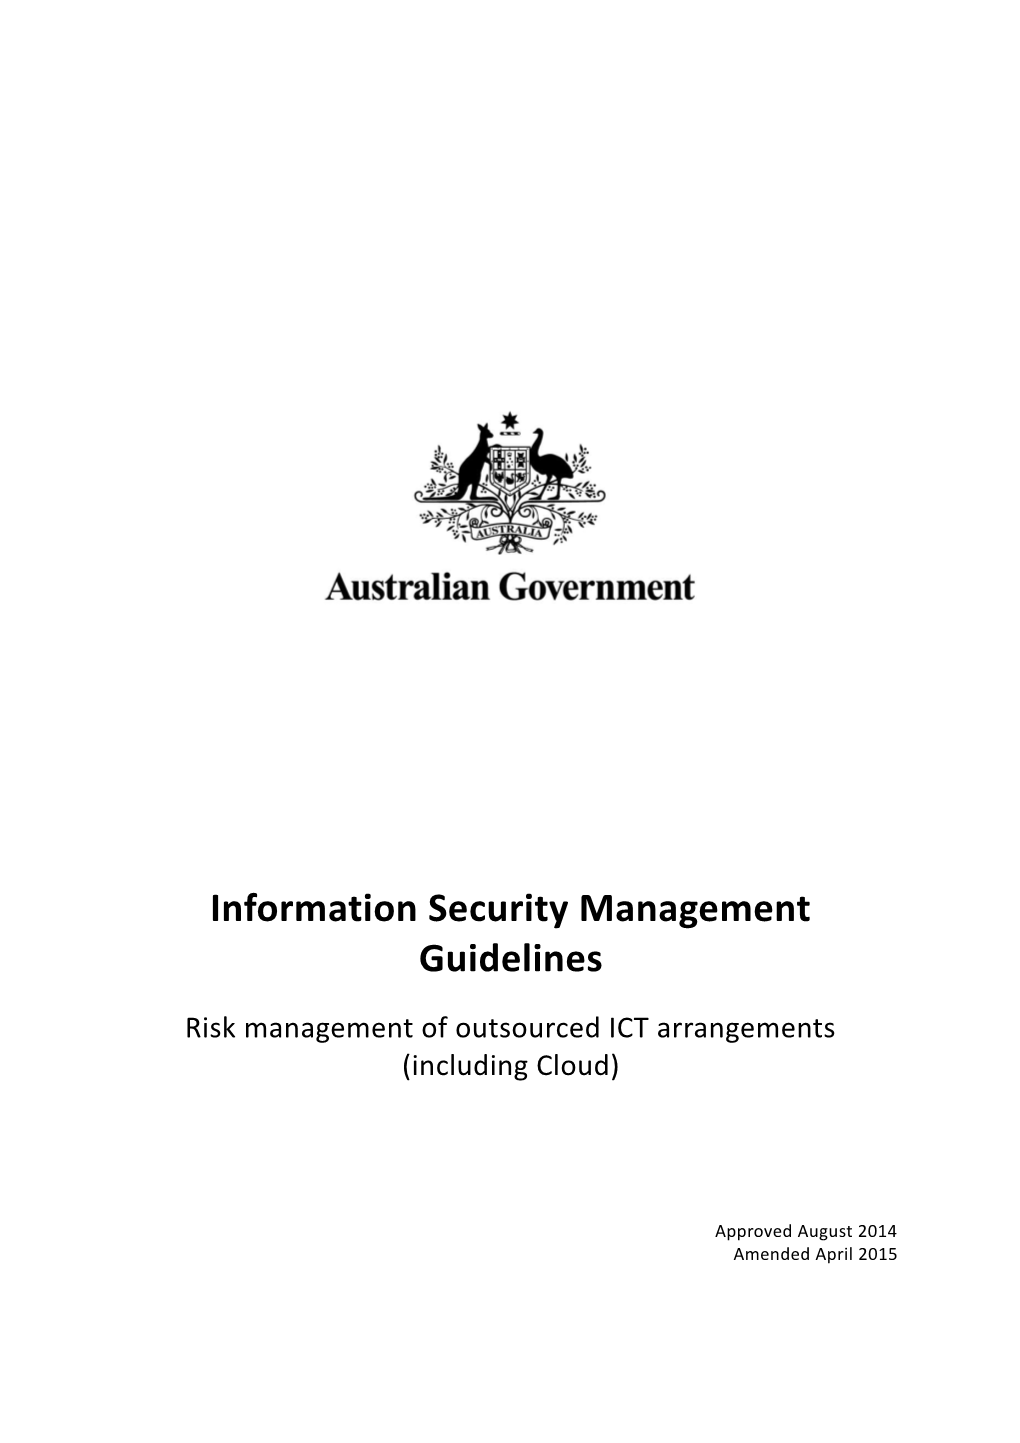 Australian Government Information Security Guidelines